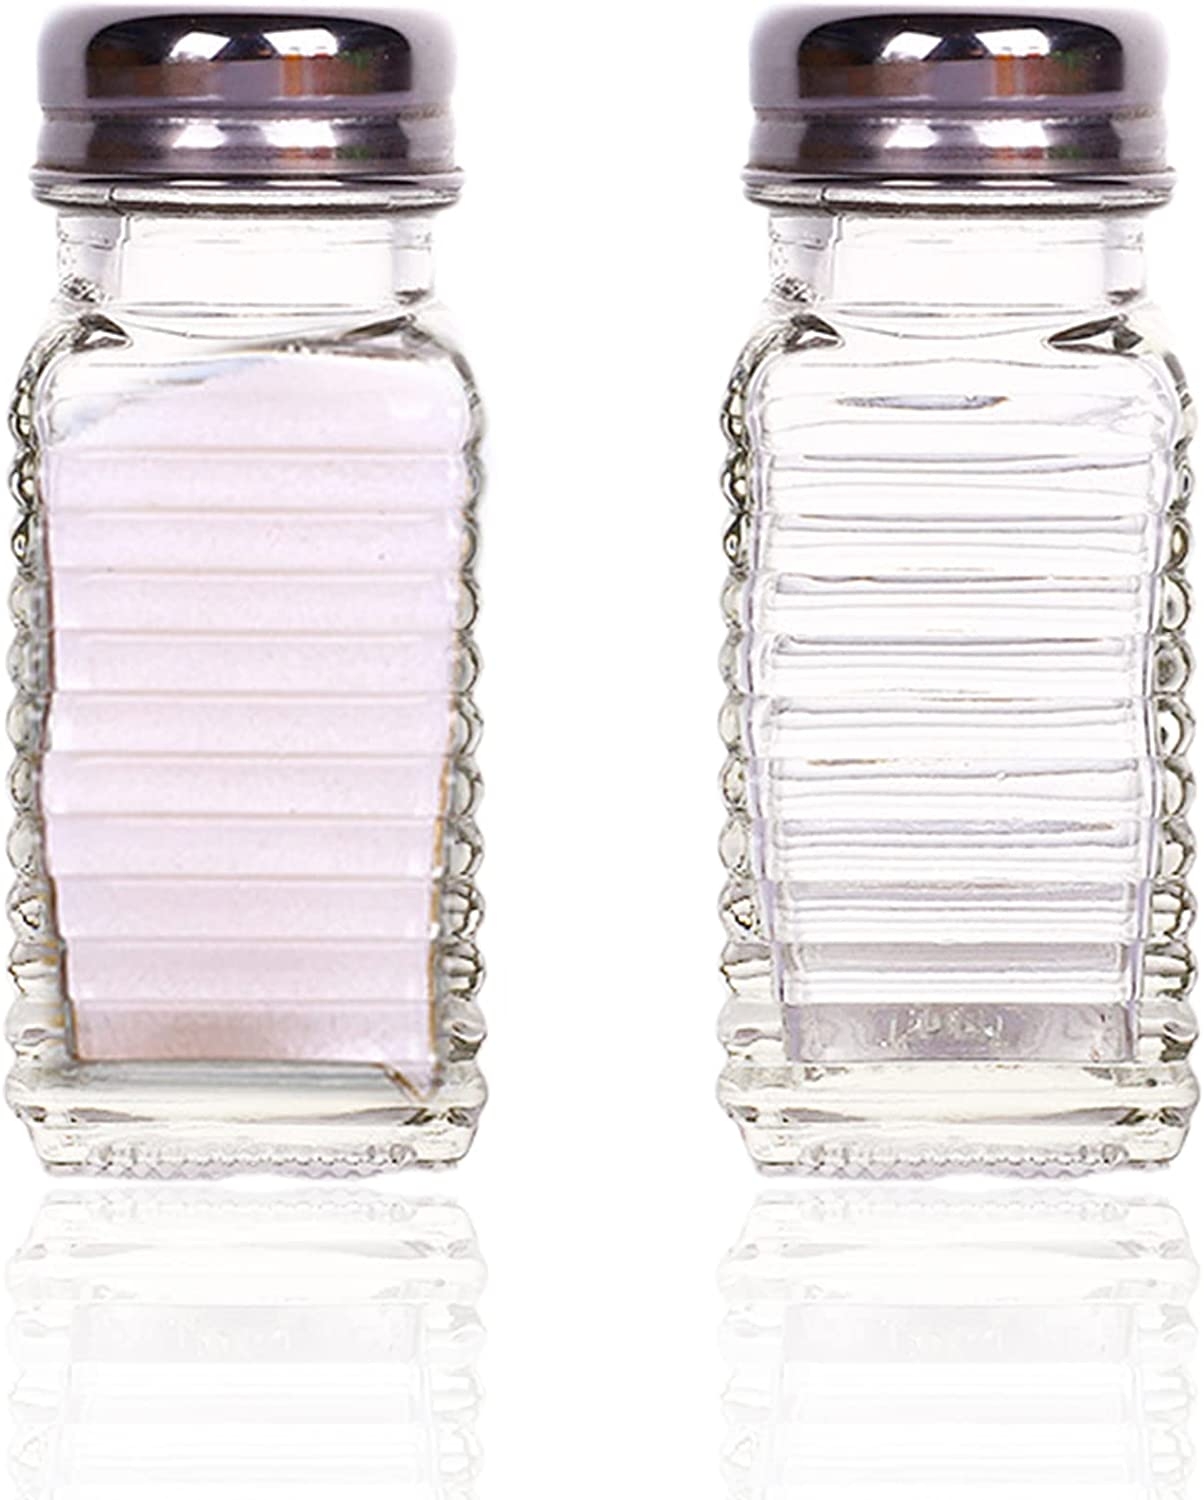 1st Choice FBA_BCK31360 Retro Style Salt and Pepper Shakers with Stainless Tops (2), 1, Original Version Import To Shop